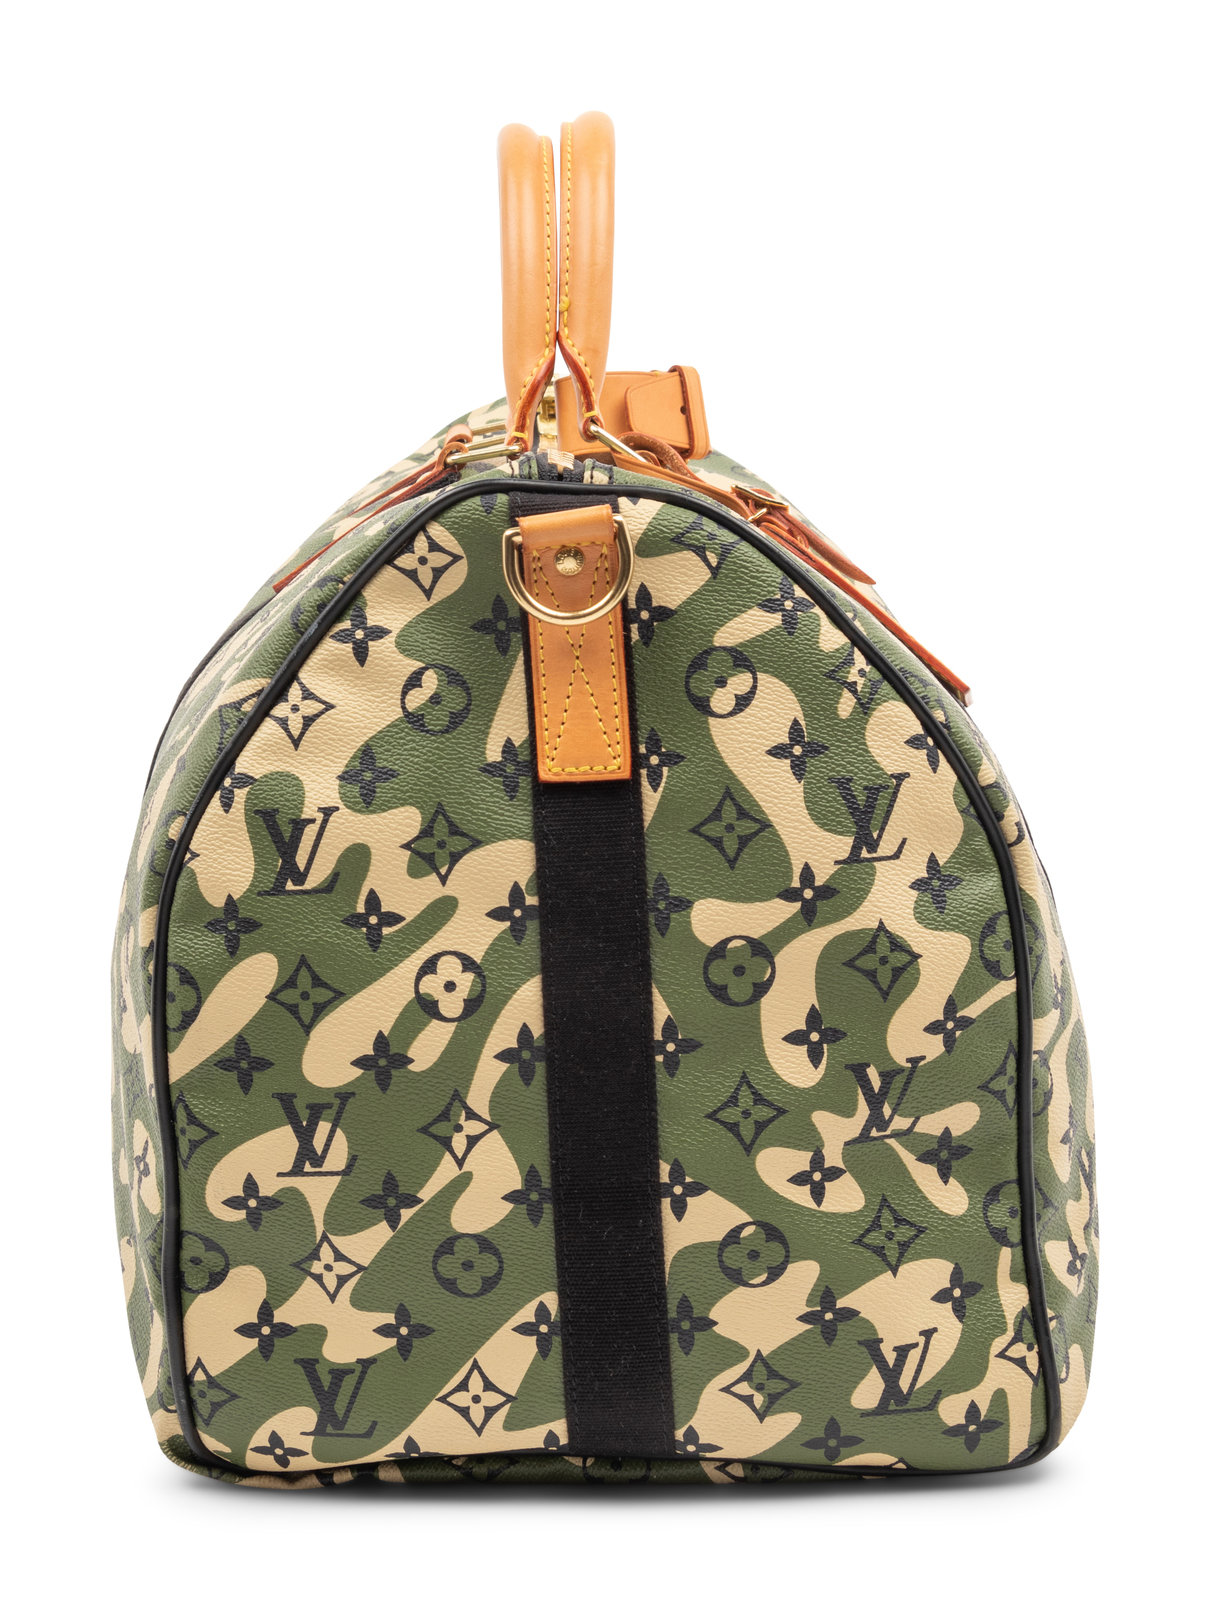 Louis Vuitton Limited Edition Keepall Bandoulière 55 in Monogramouflage  Coated Canvas, Takashi Murakami, 2008